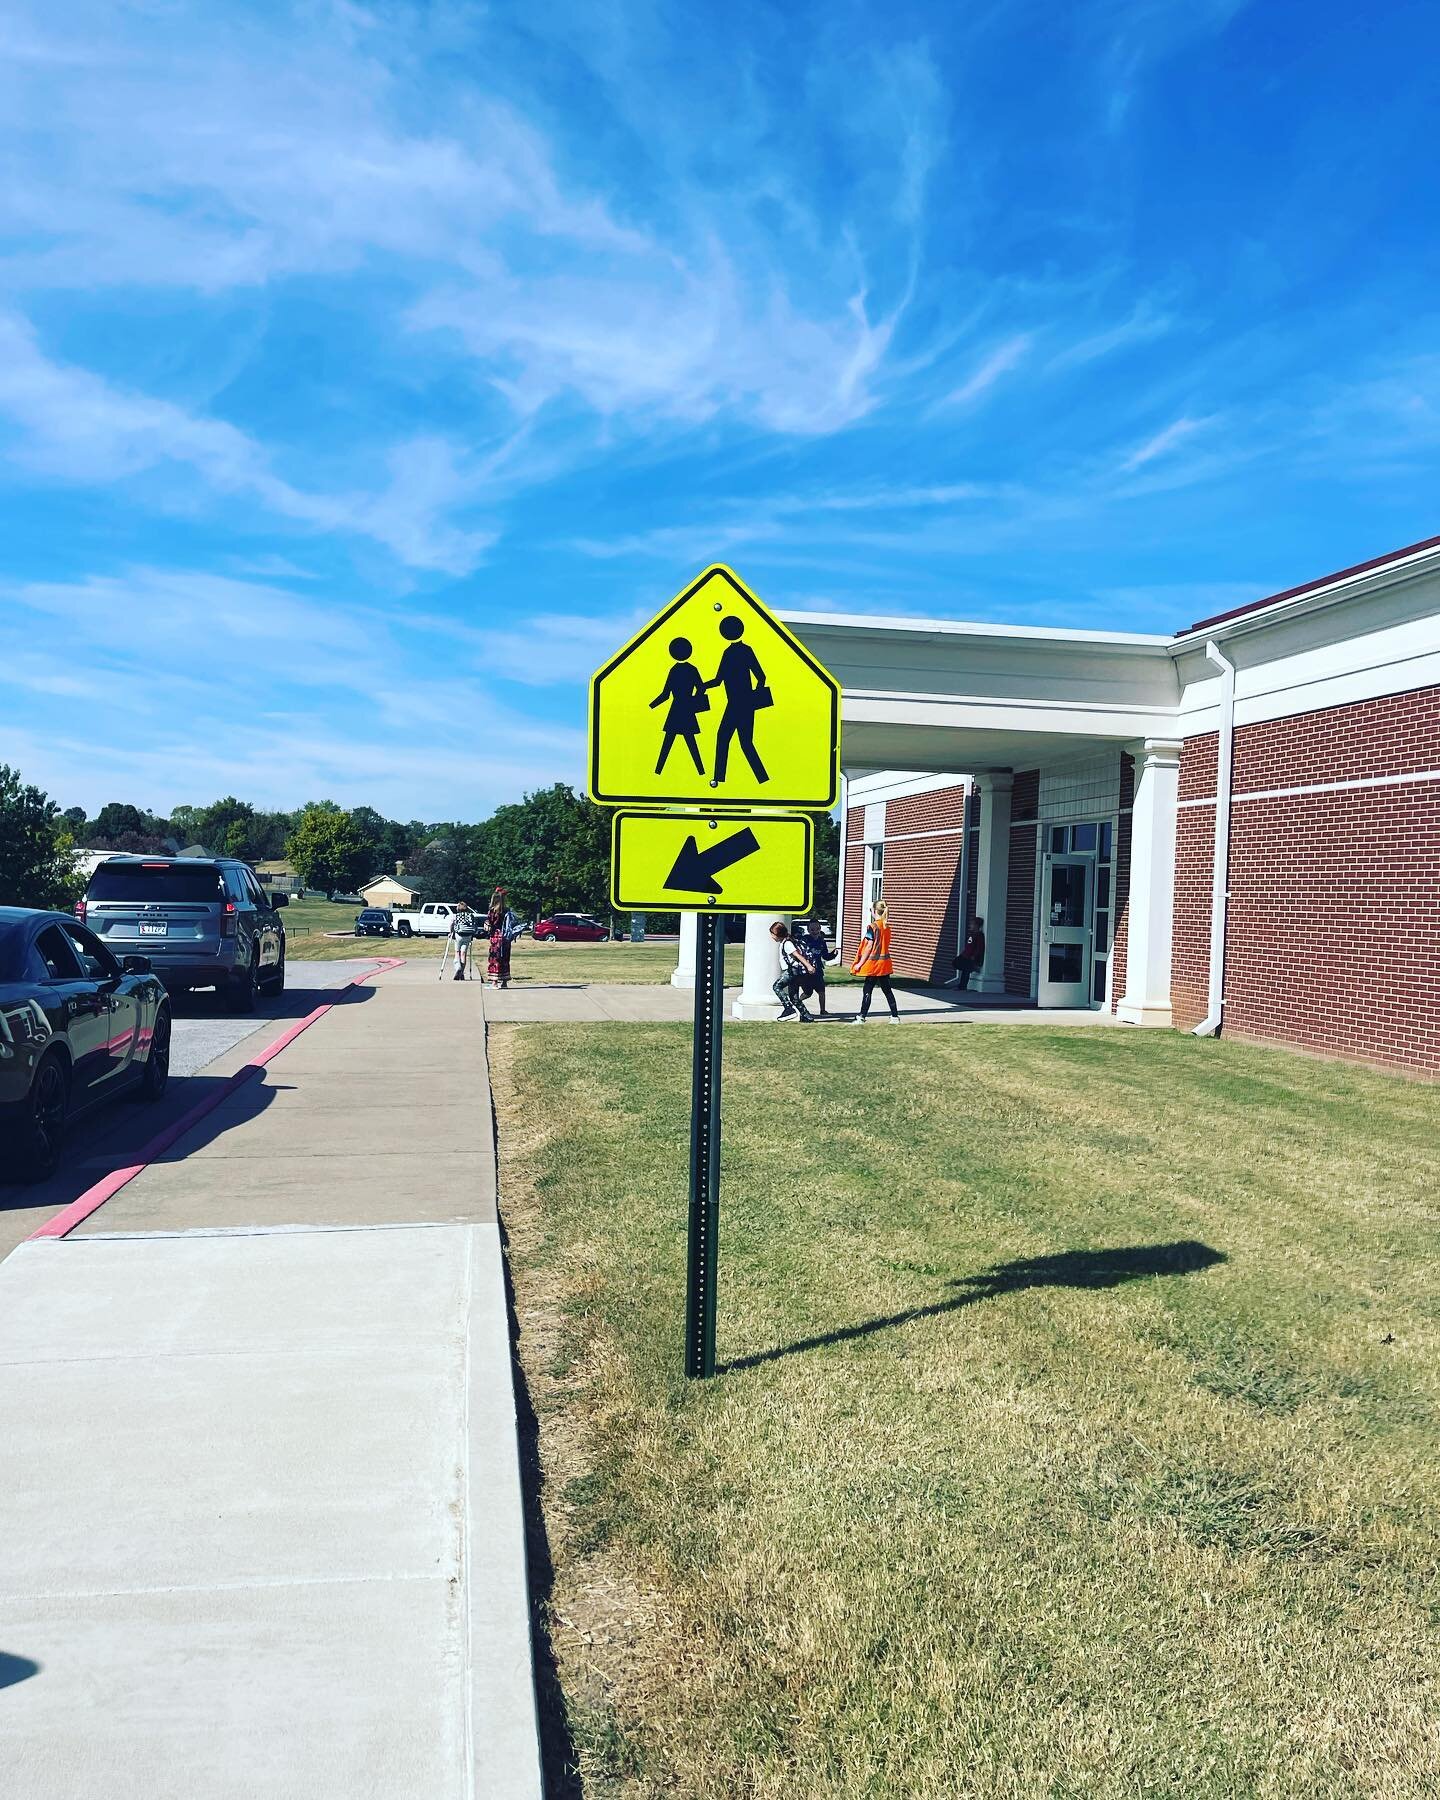 Recently at school the cross walks were being blocked by unknowing (or just not attentive) carpool line patrons, waiting to pick up kids at the end of school. I&rsquo;ve been able to kindly ask people to move forward to backwards a few feet to let us